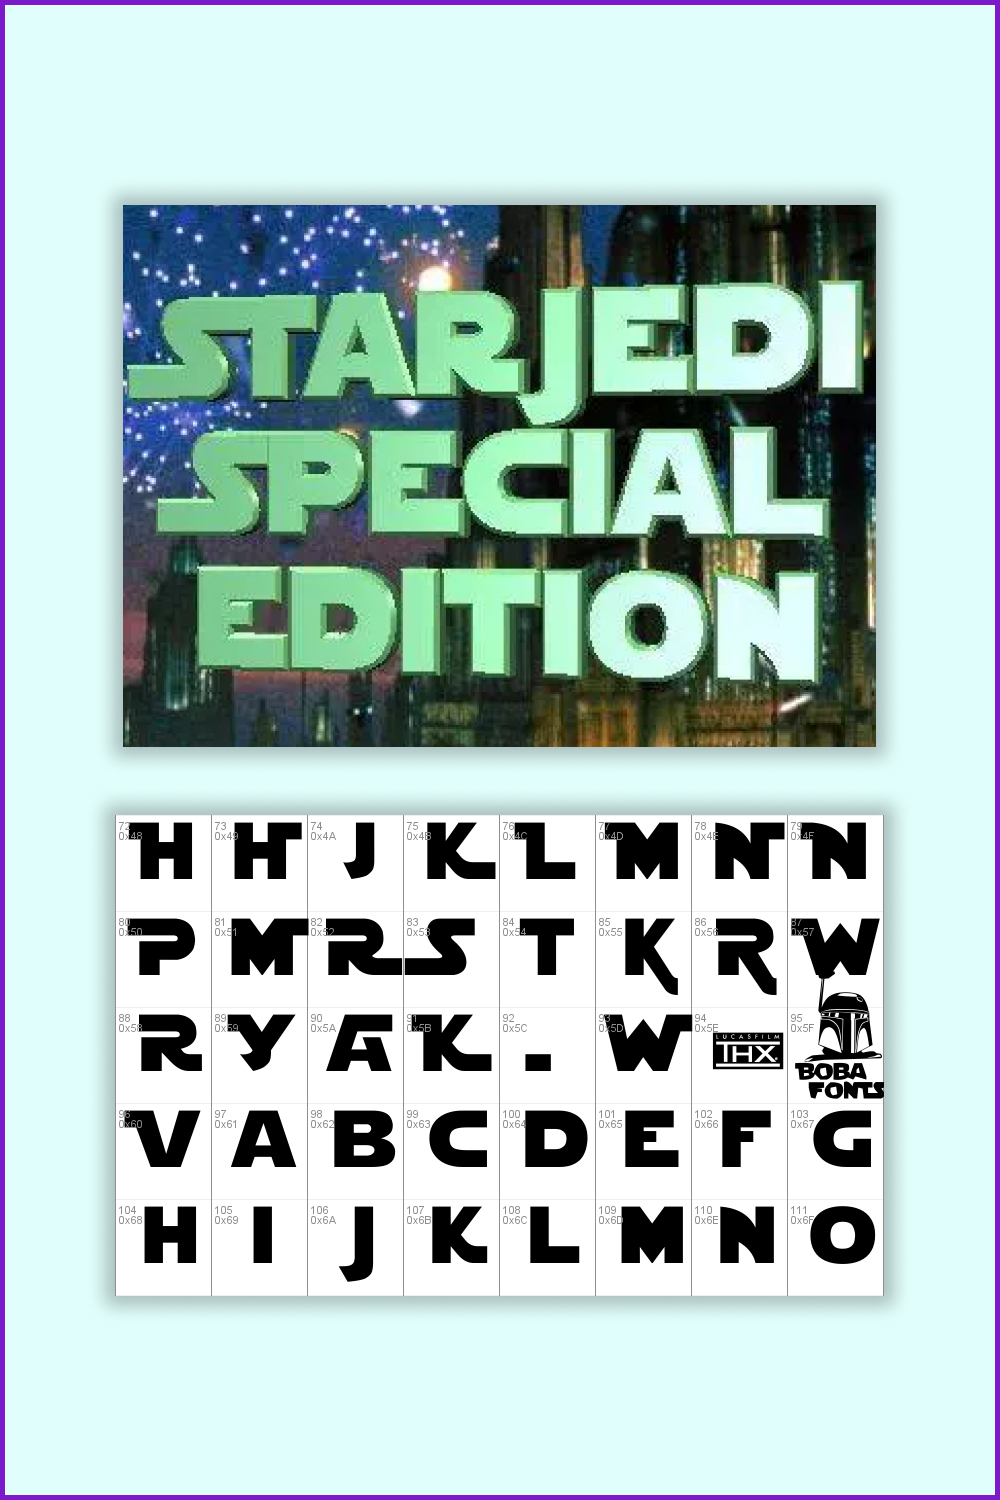 Collage of the alphabet Star Jedi on the background of the city.